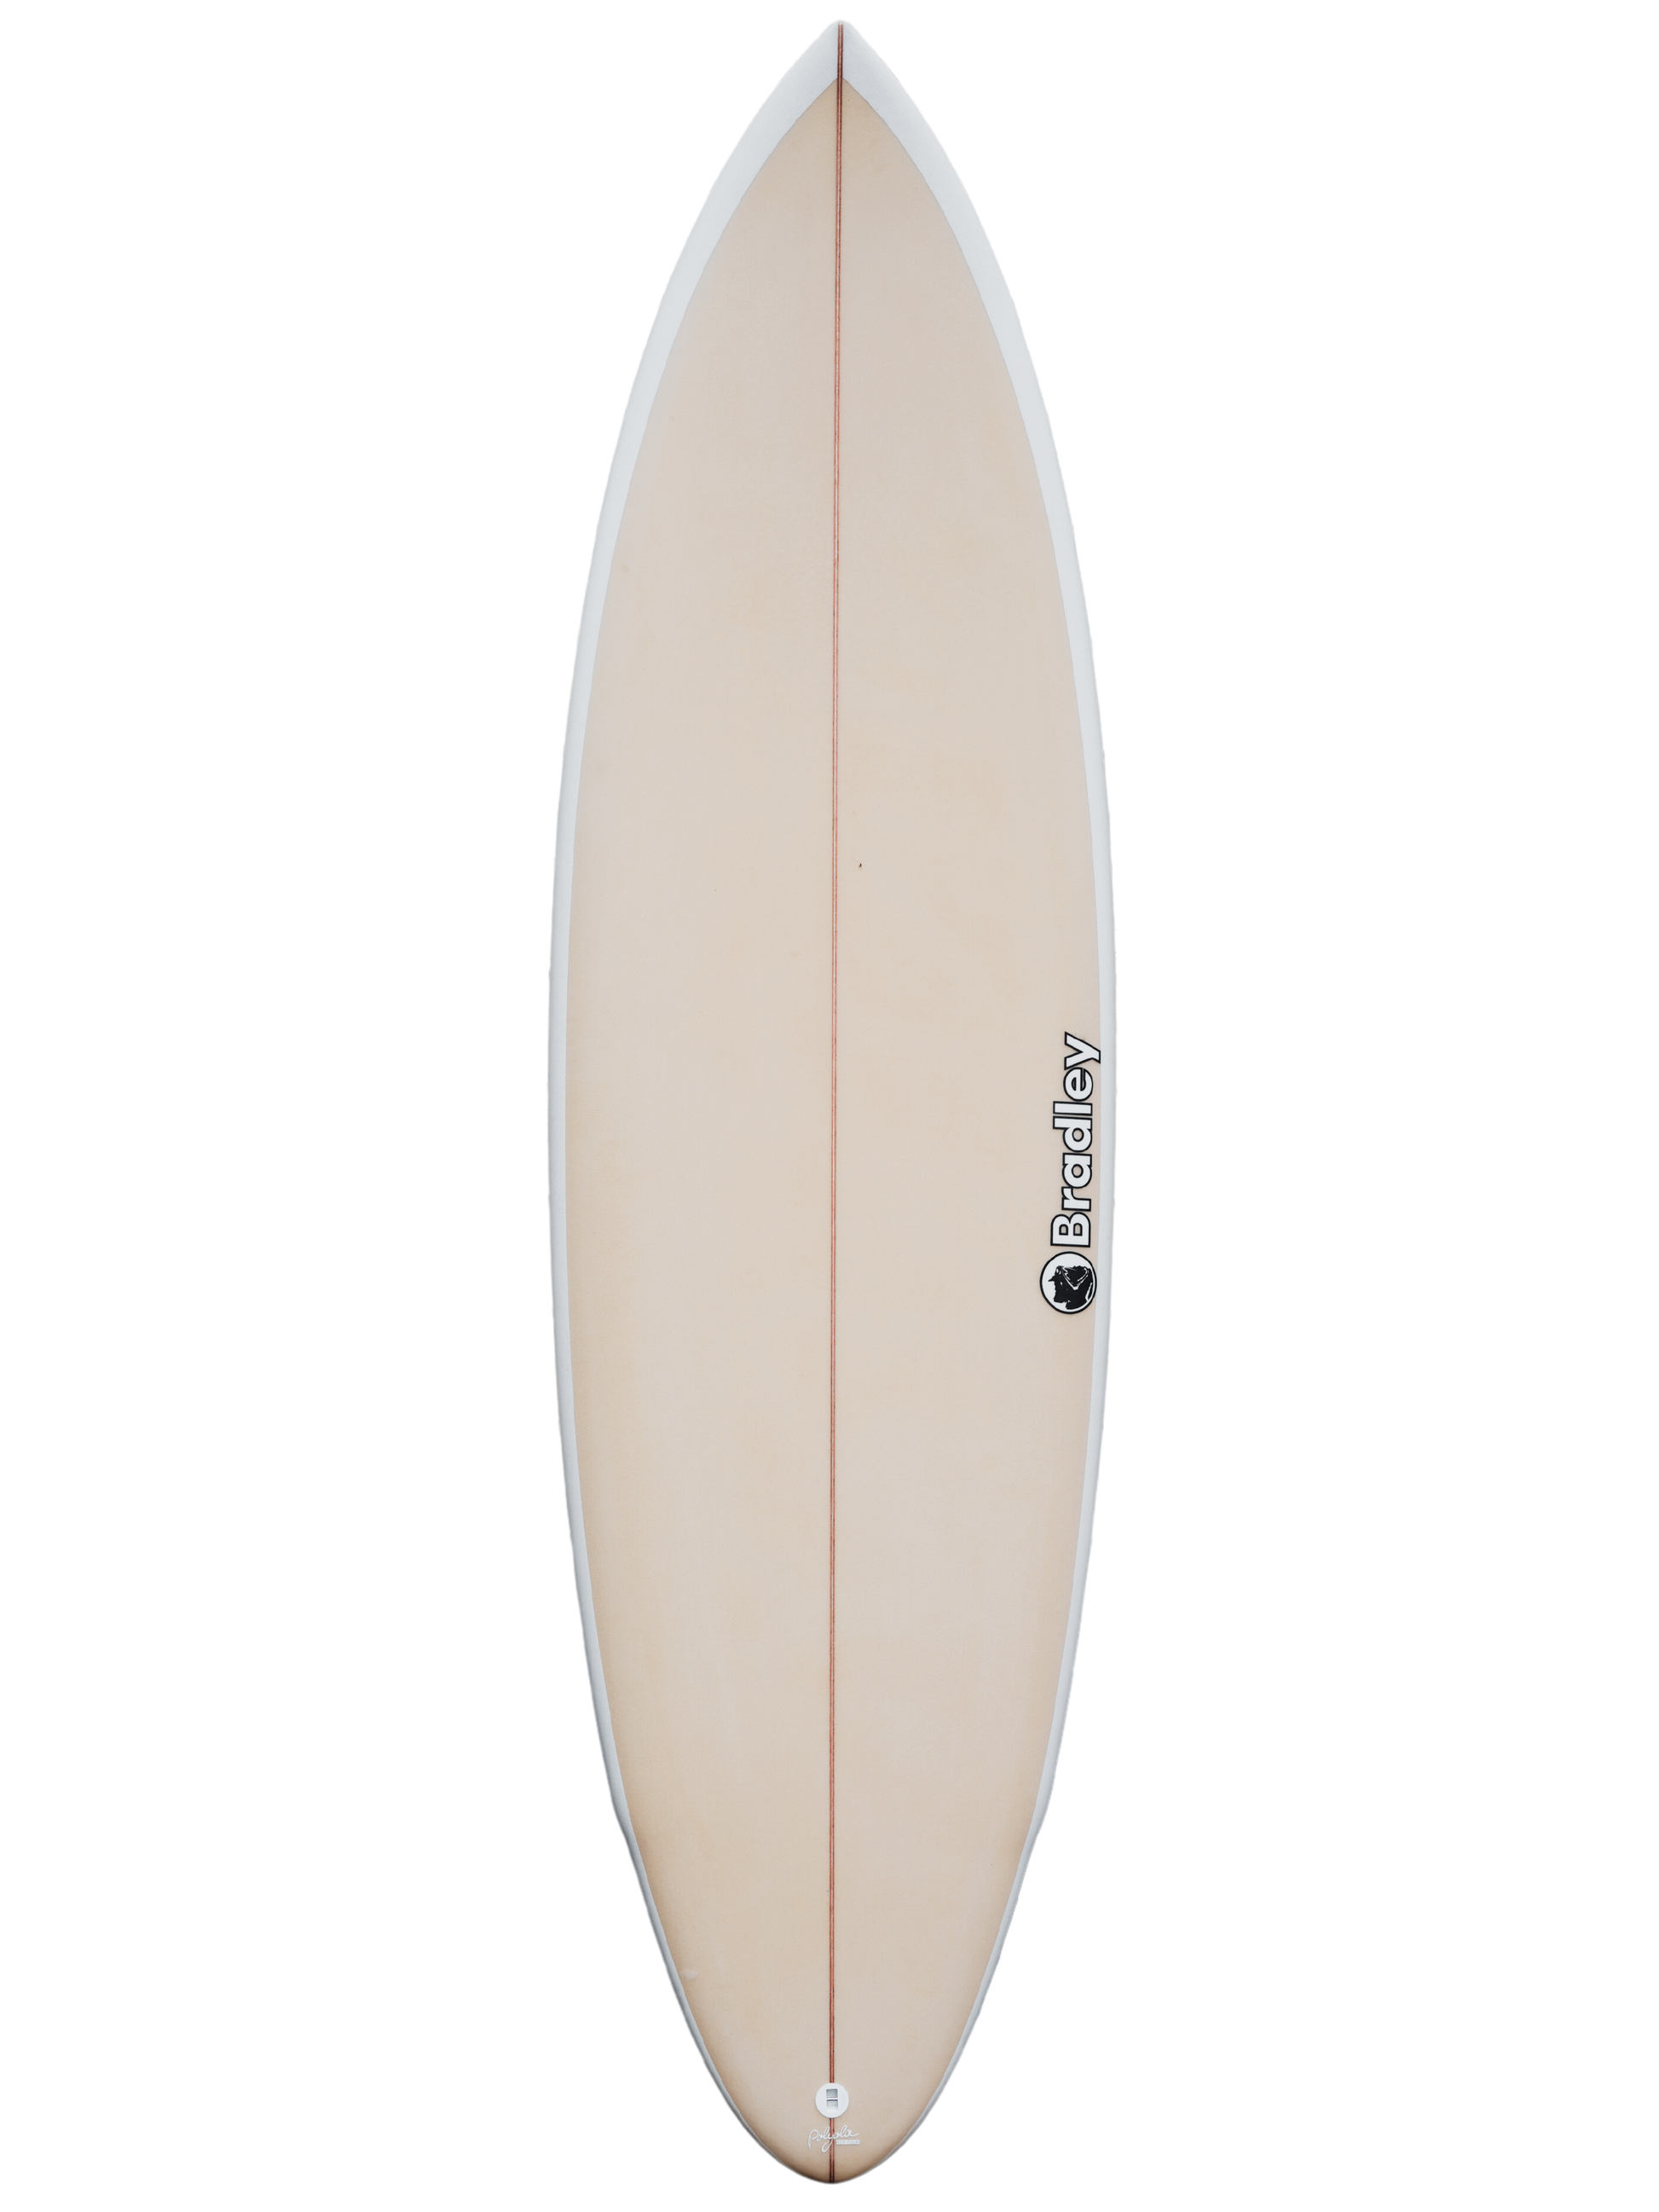 Surfboard made by Bradley with polyola Eco-Tec, Model: Hossego2